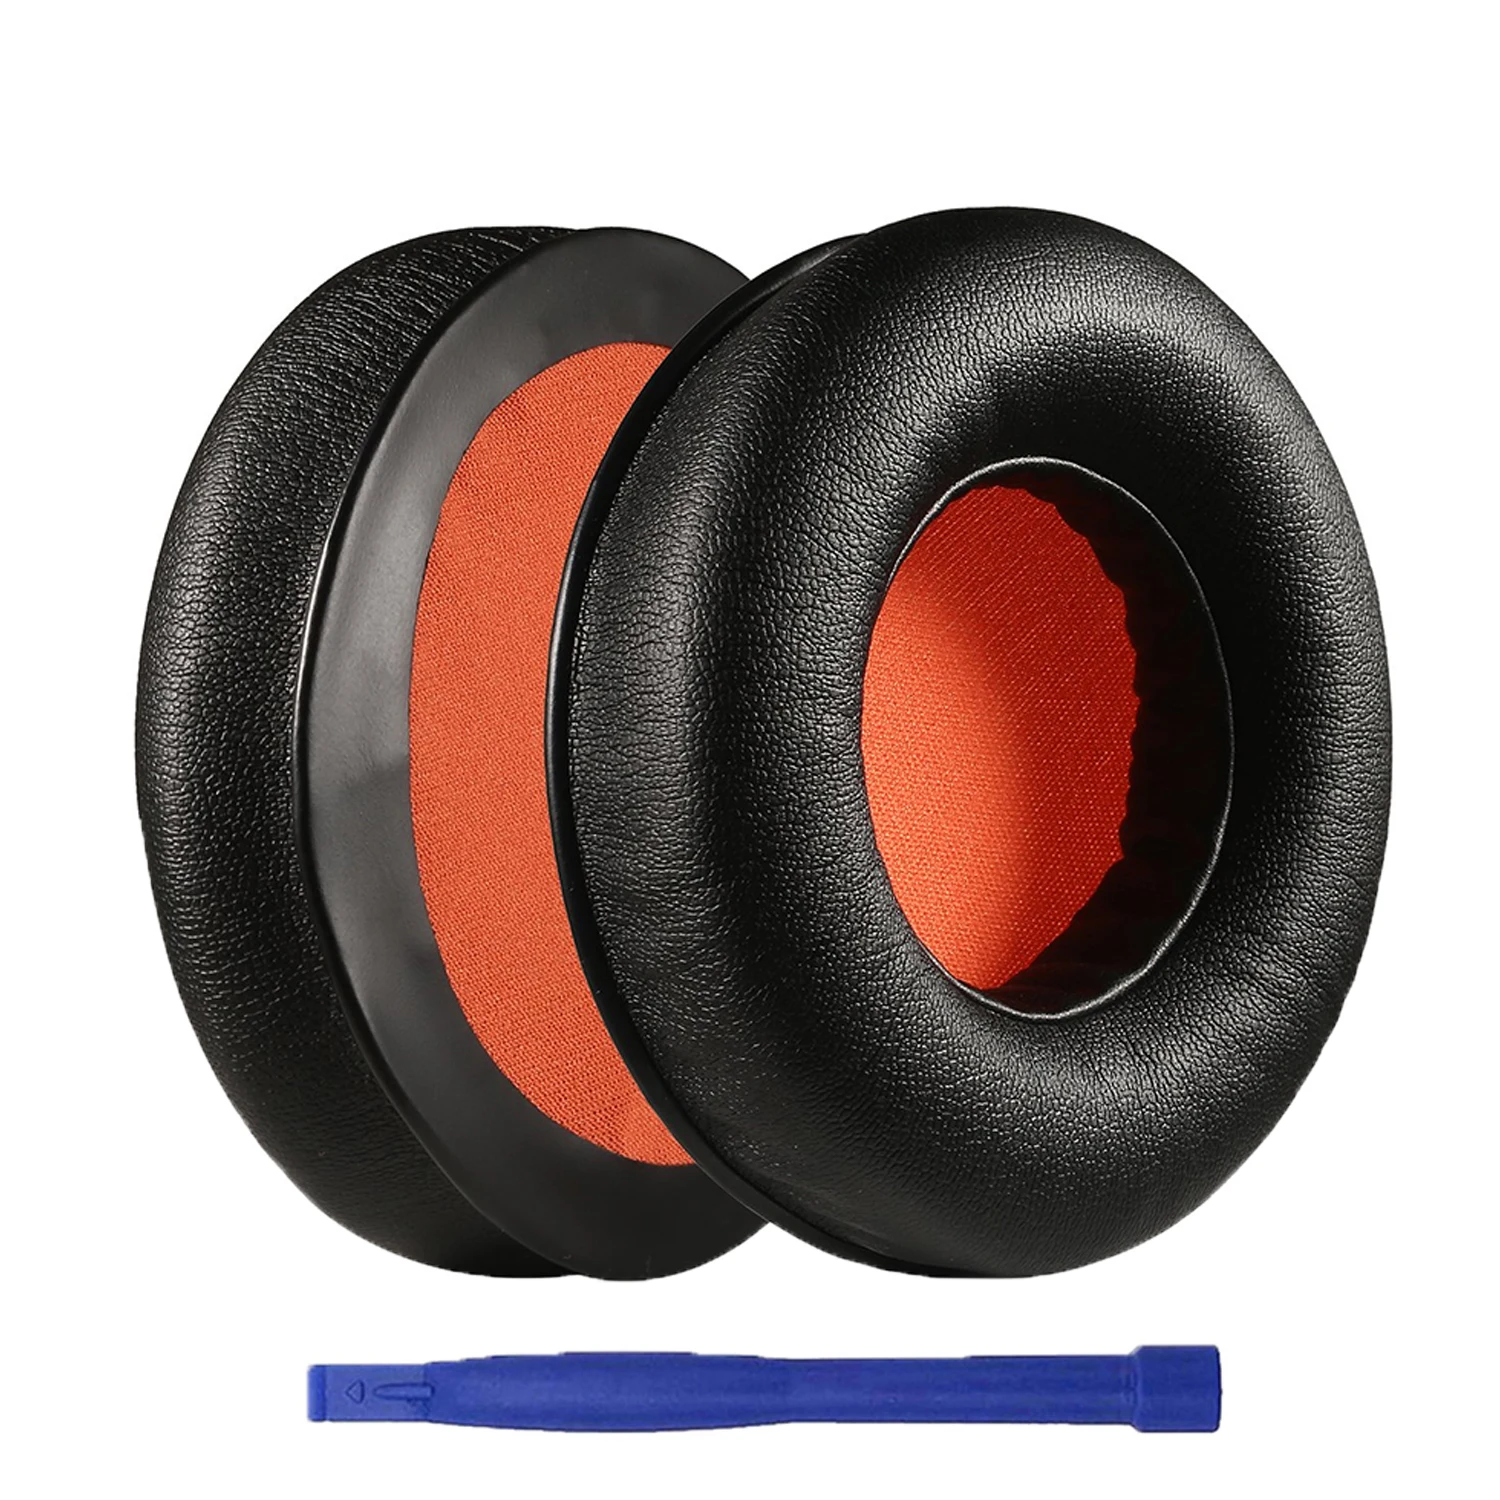 

Replacement Earpads Ear Pads Muffs Cups Cushion Cover Repair Parts for Razer Kraken Pro V1 USB Version 7.1 Headphones Headsets